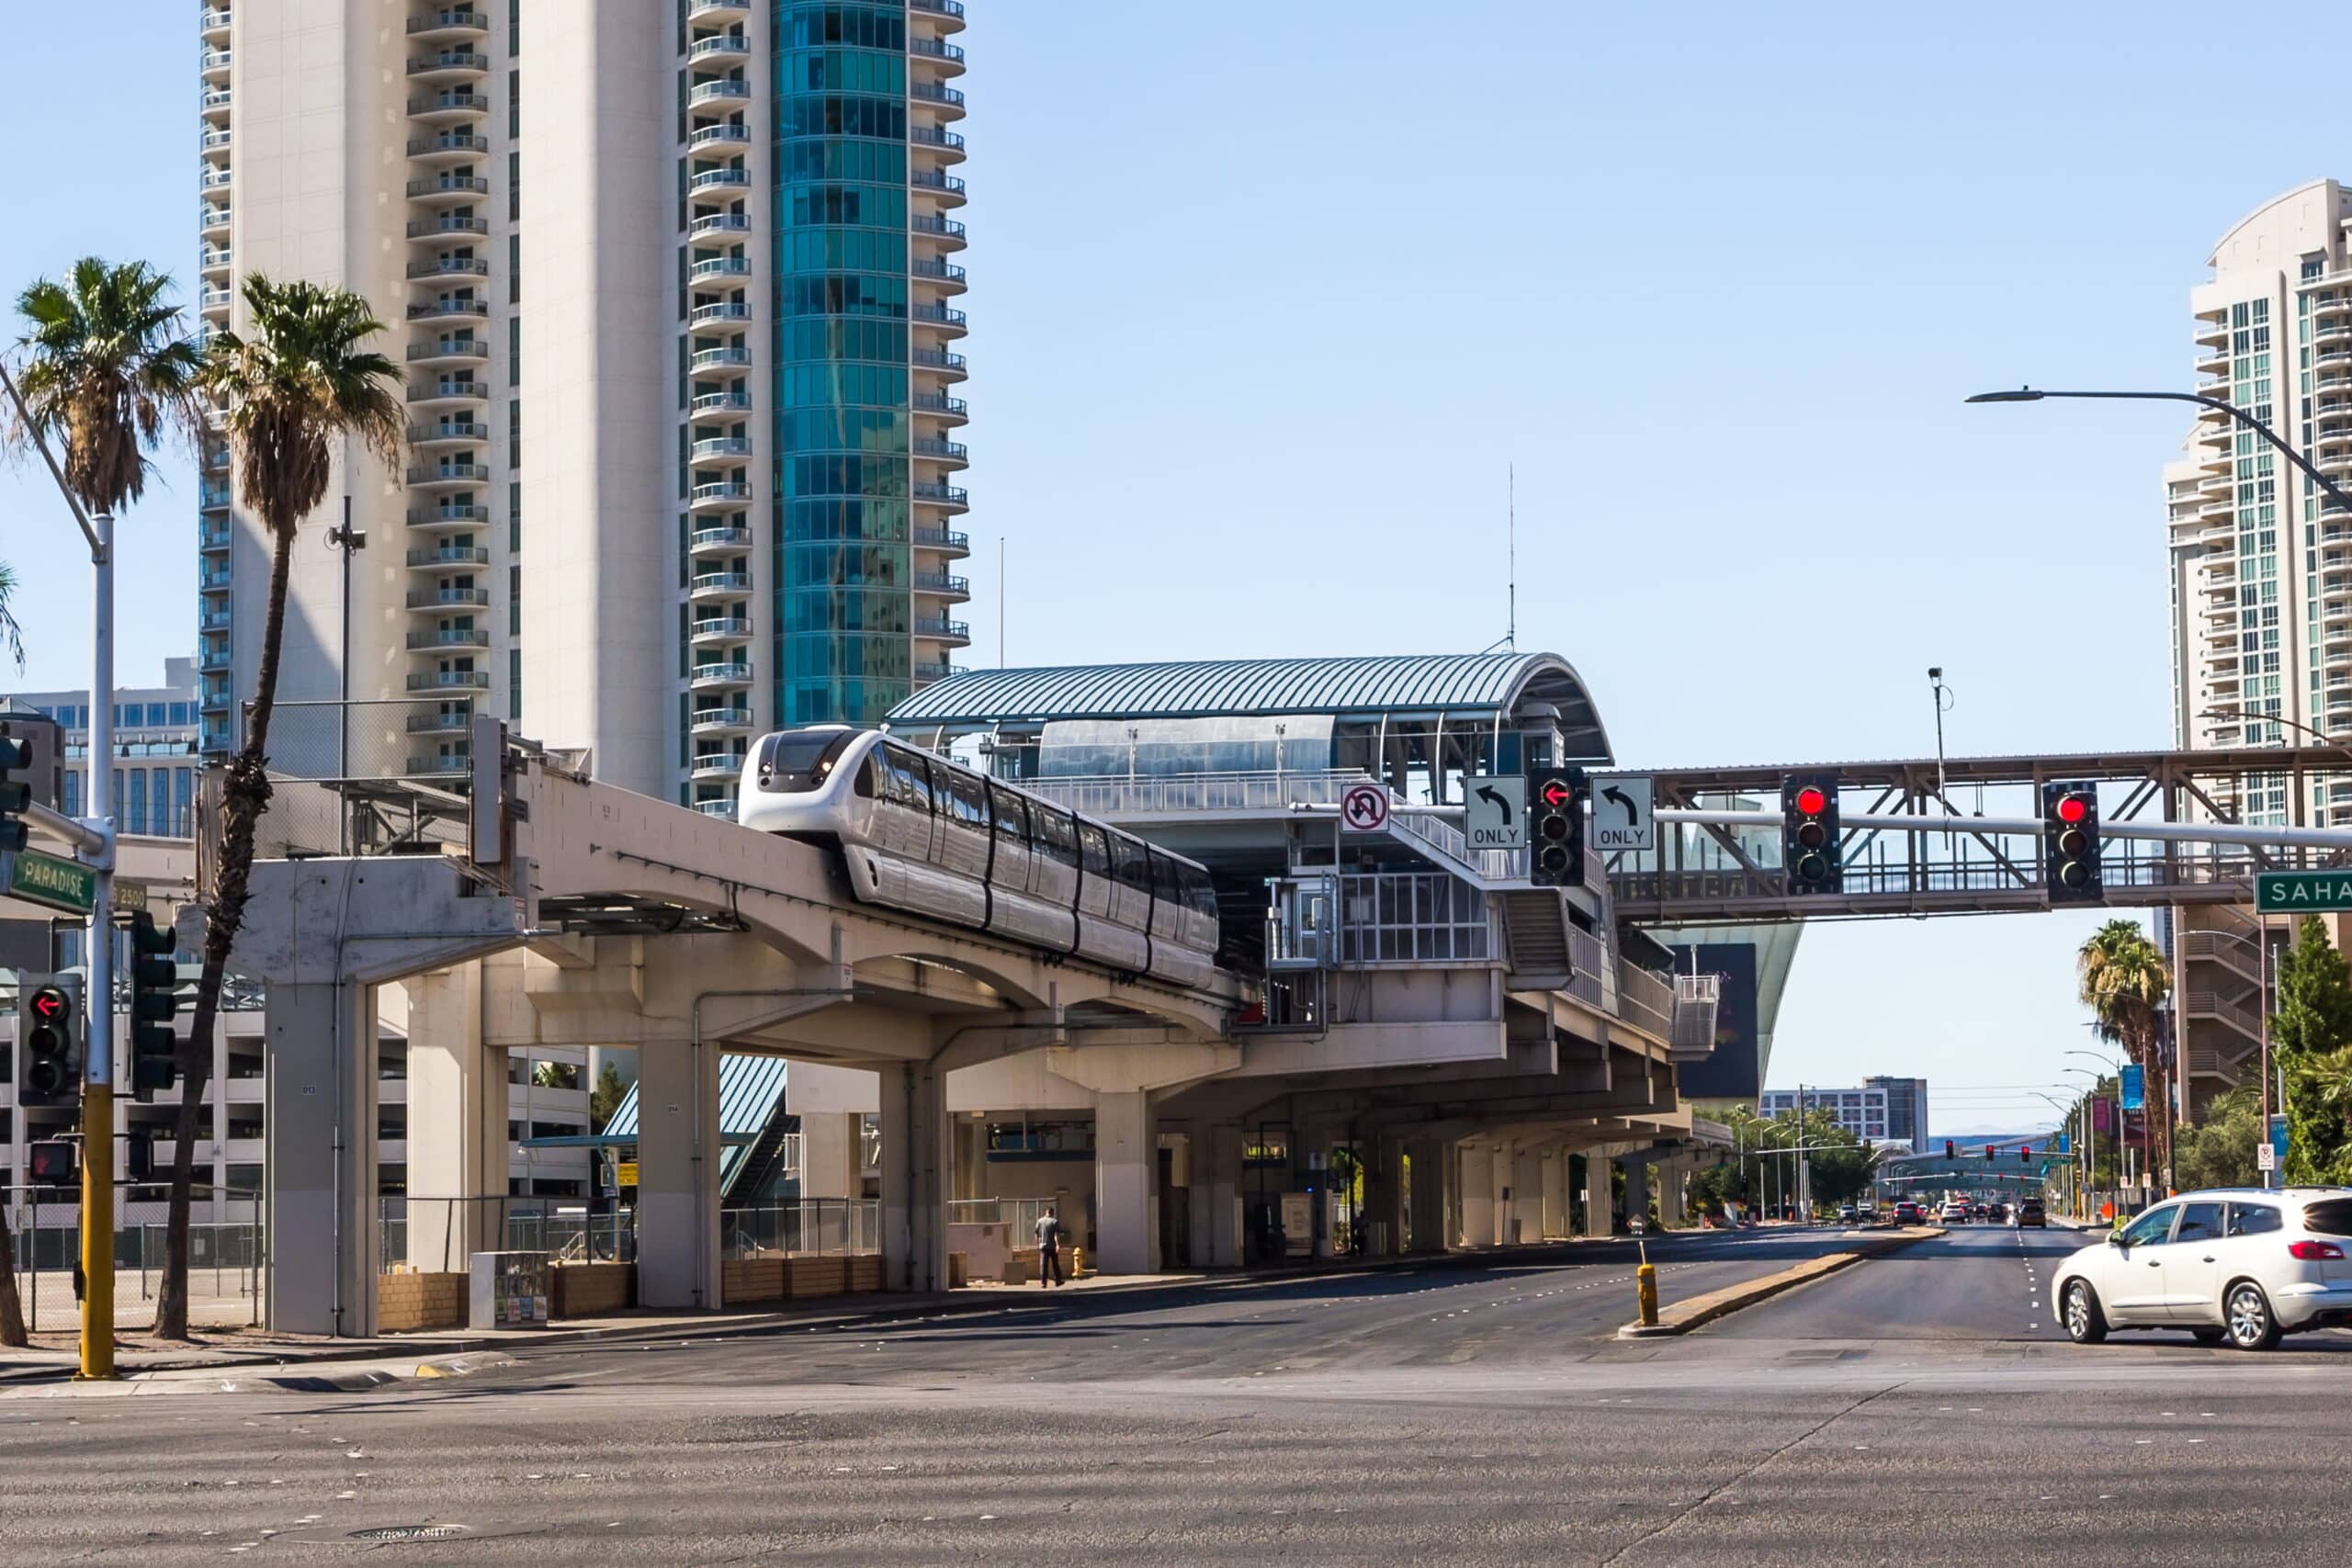 How Often Does the Las Vegas Monorail Run?